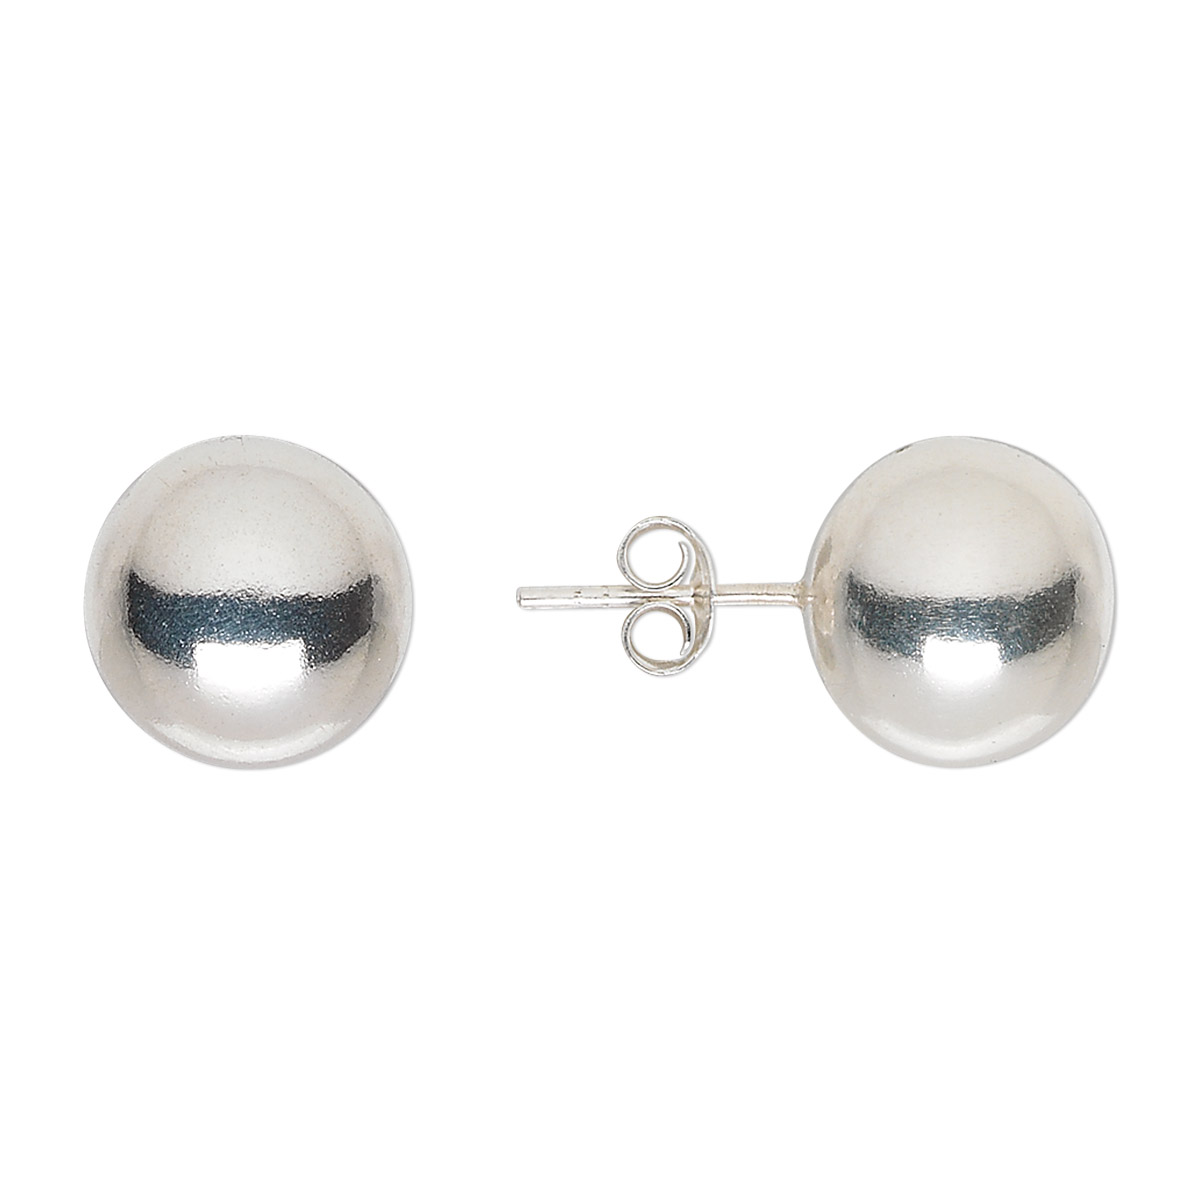 Earstud, sterling silver, 12mm ball with post. Sold per pair. - Fire ...